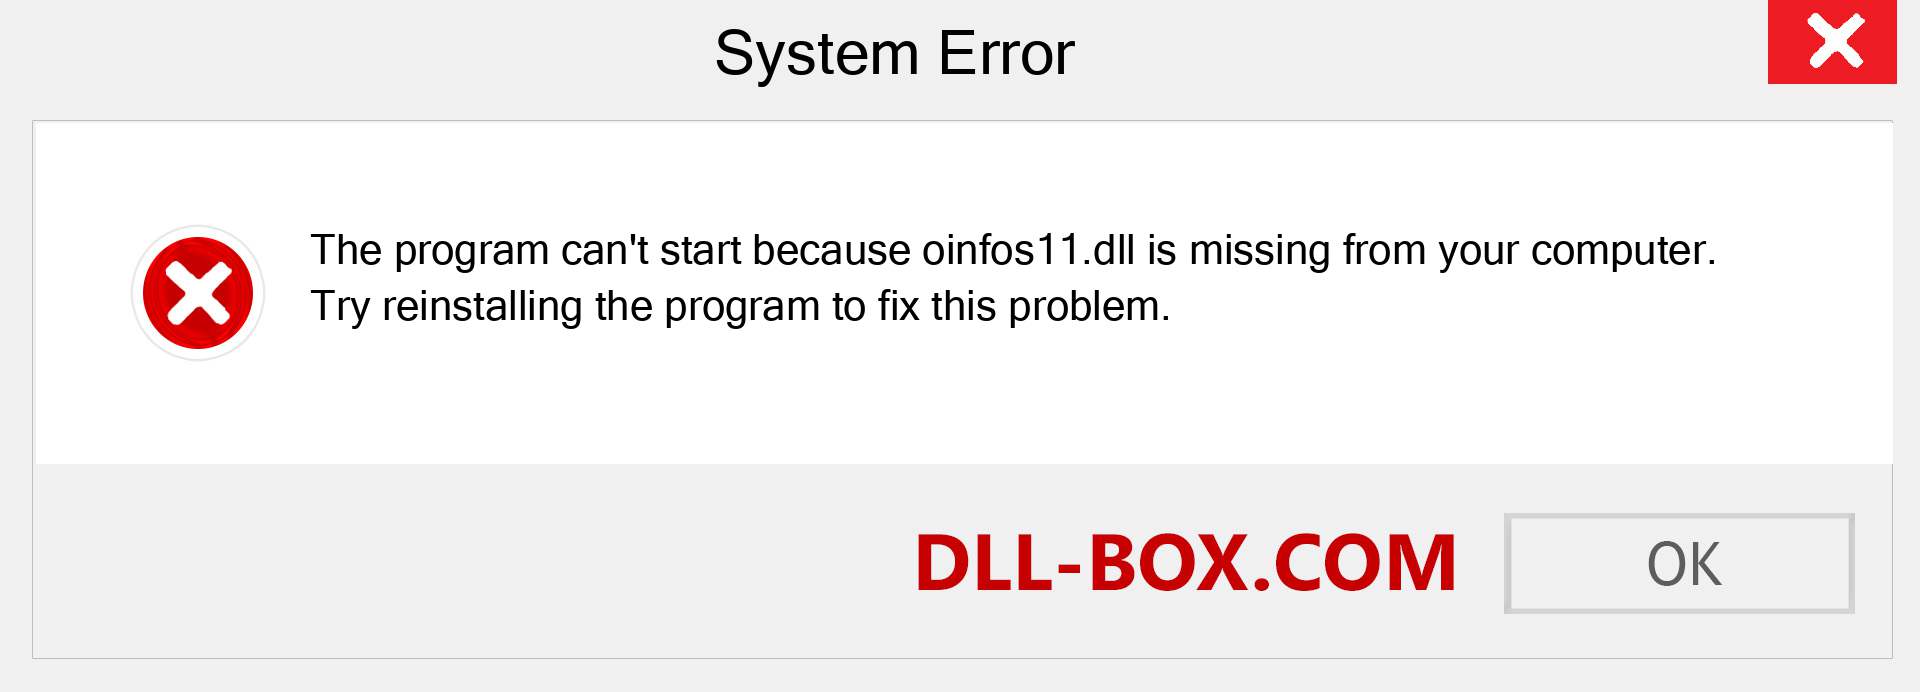  oinfos11.dll file is missing?. Download for Windows 7, 8, 10 - Fix  oinfos11 dll Missing Error on Windows, photos, images